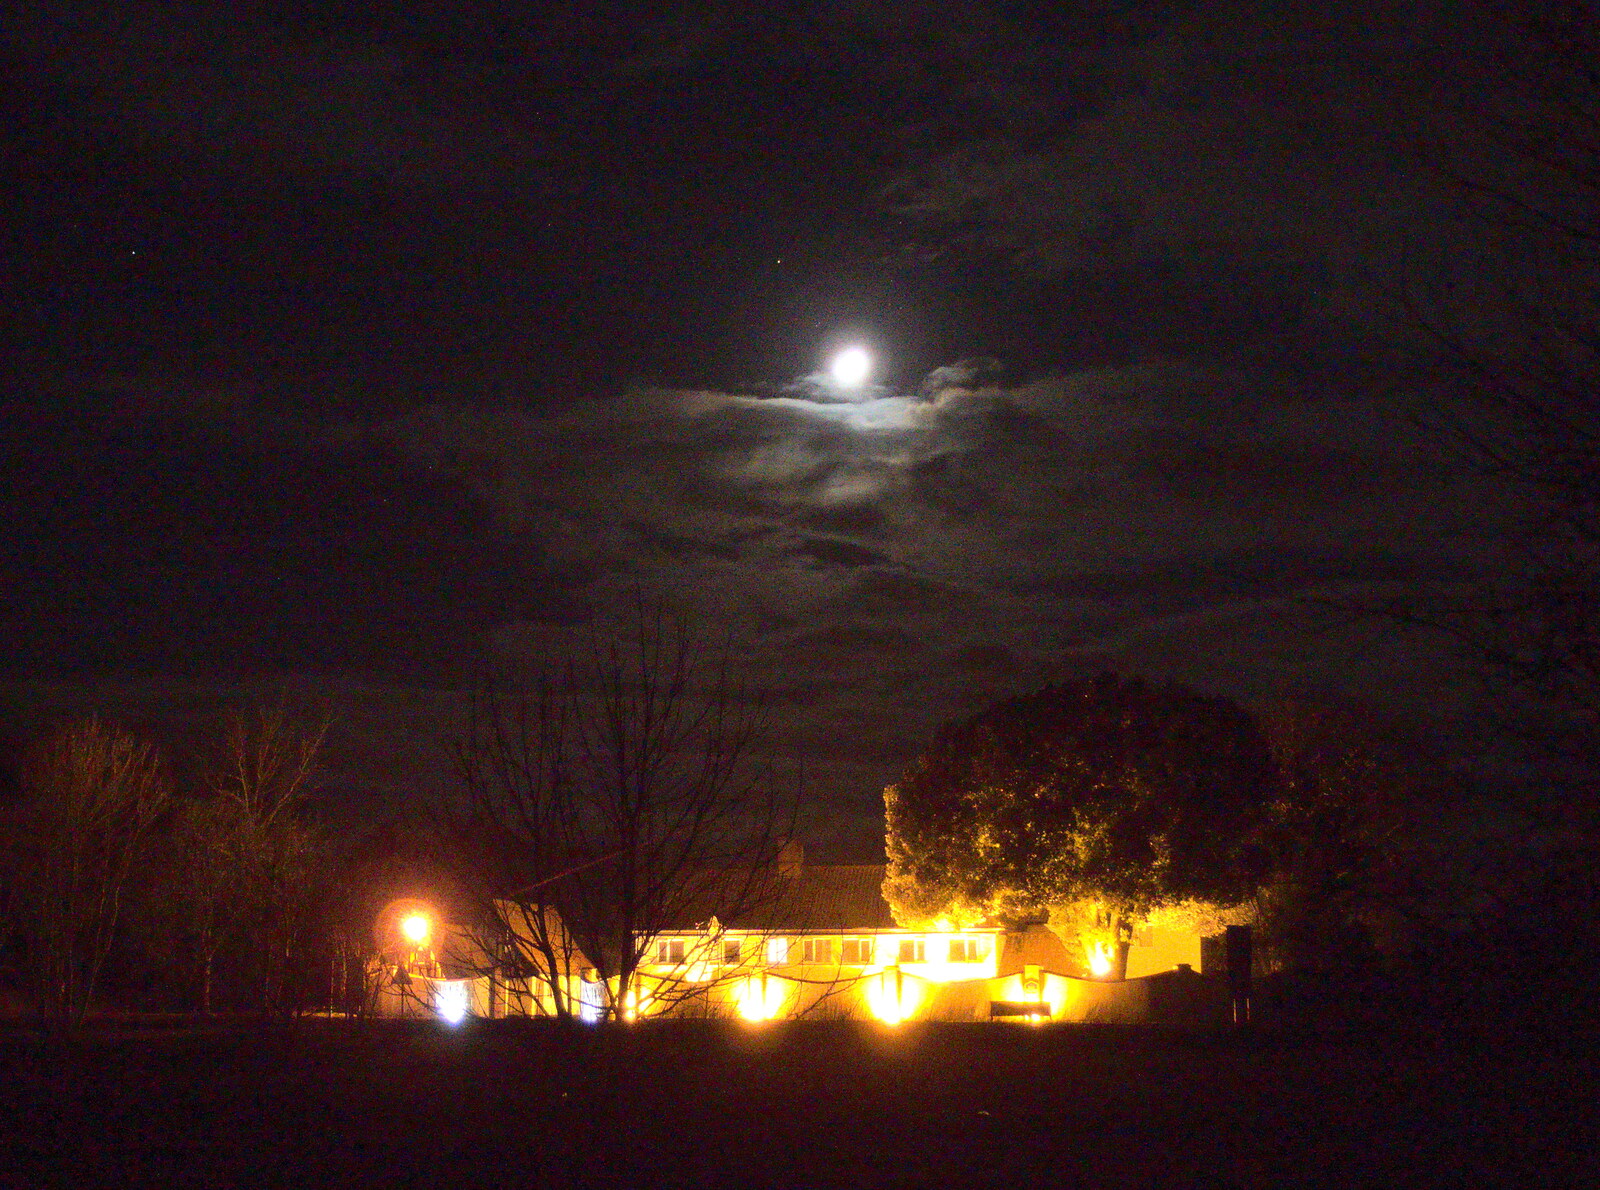 The moon over the Brome Grange from Paul's Birthday and other March Miscellany - 6th March 2017